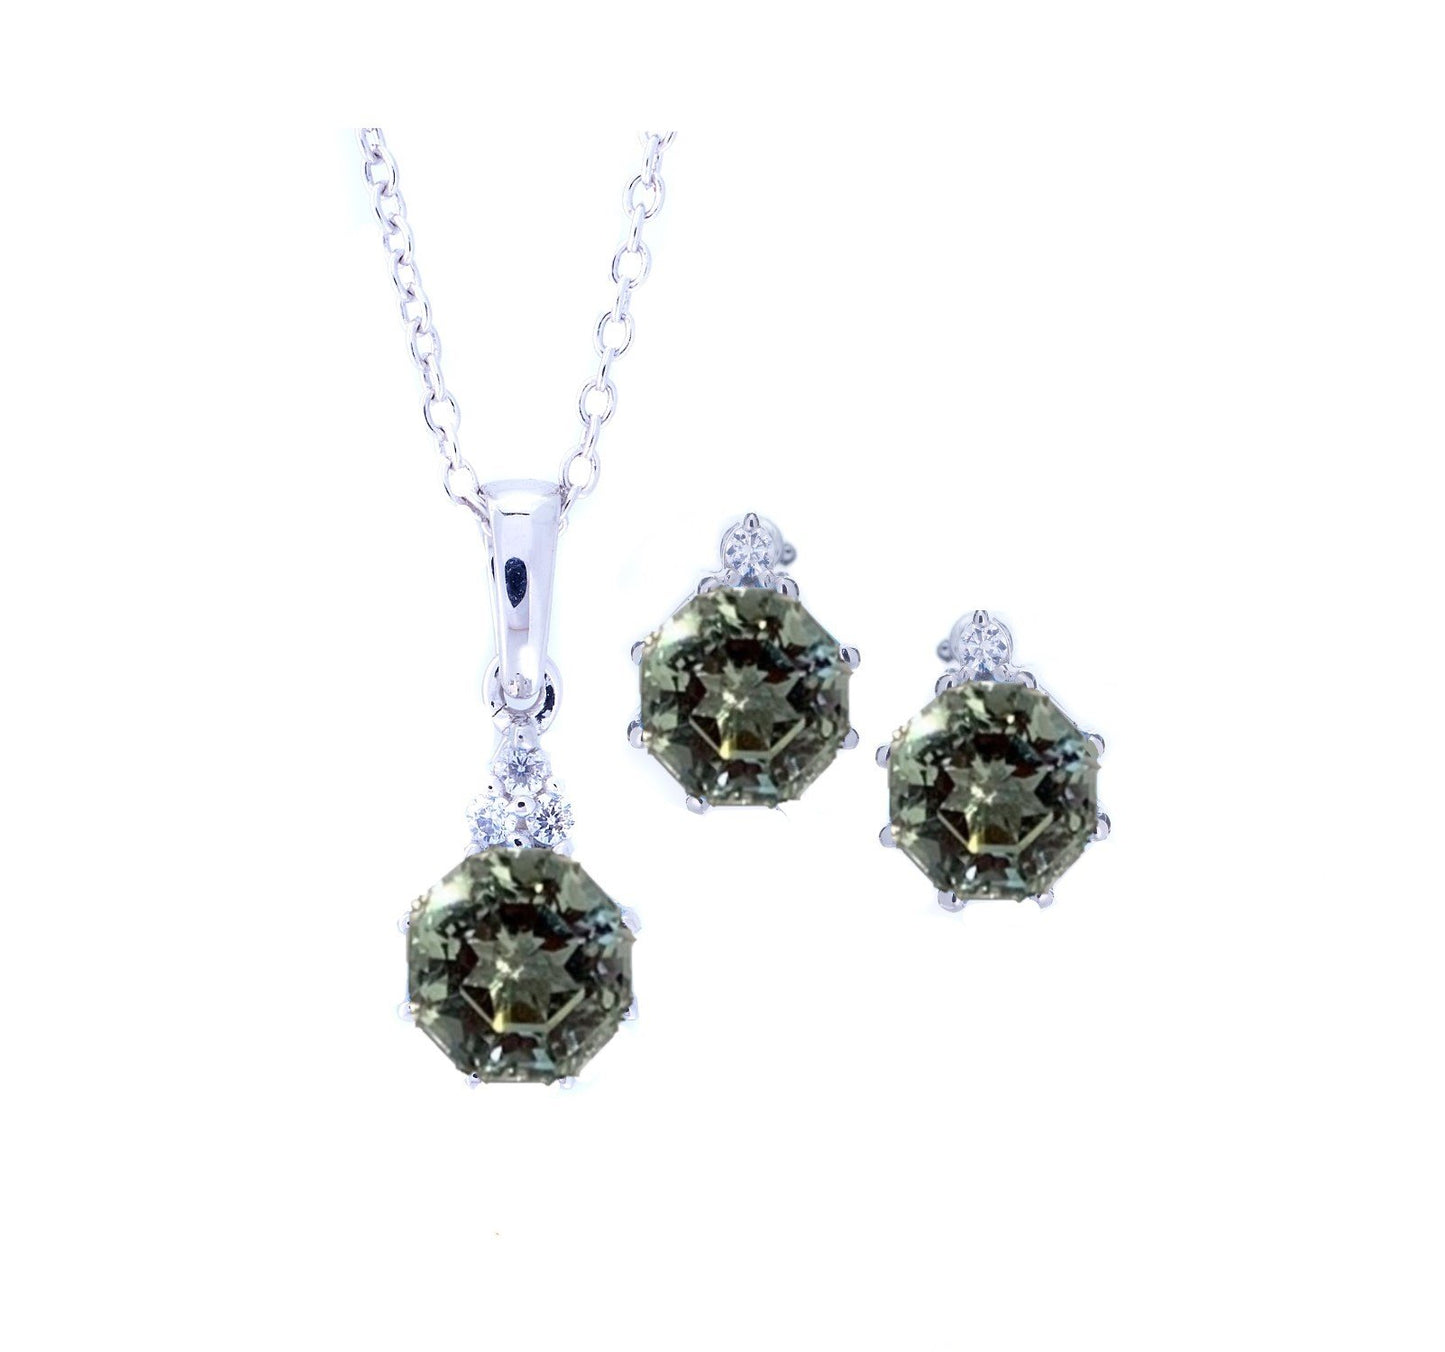 Classic 2pc pendant earring set with FARA Cut Prasiolite Green Amethyst & natural white zircon Sterling silver